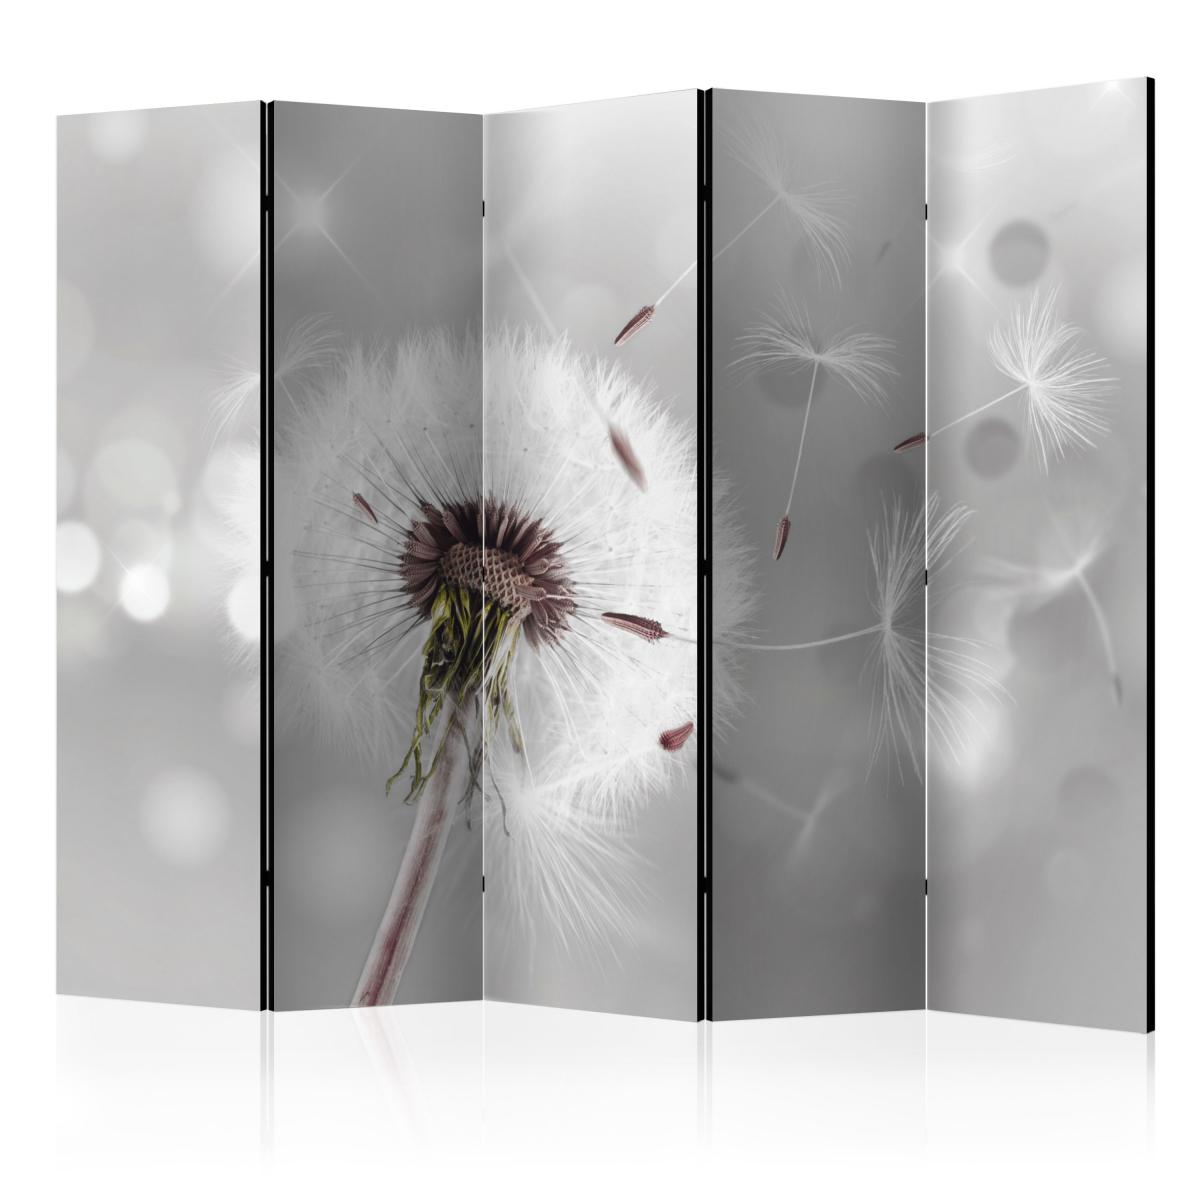 Bimago - Paravent 5 volets - Grasping the Invisible II [Room Dividers] - Décoration, image, art | 225x172 cm | XL - Grand Format | - Cloisons